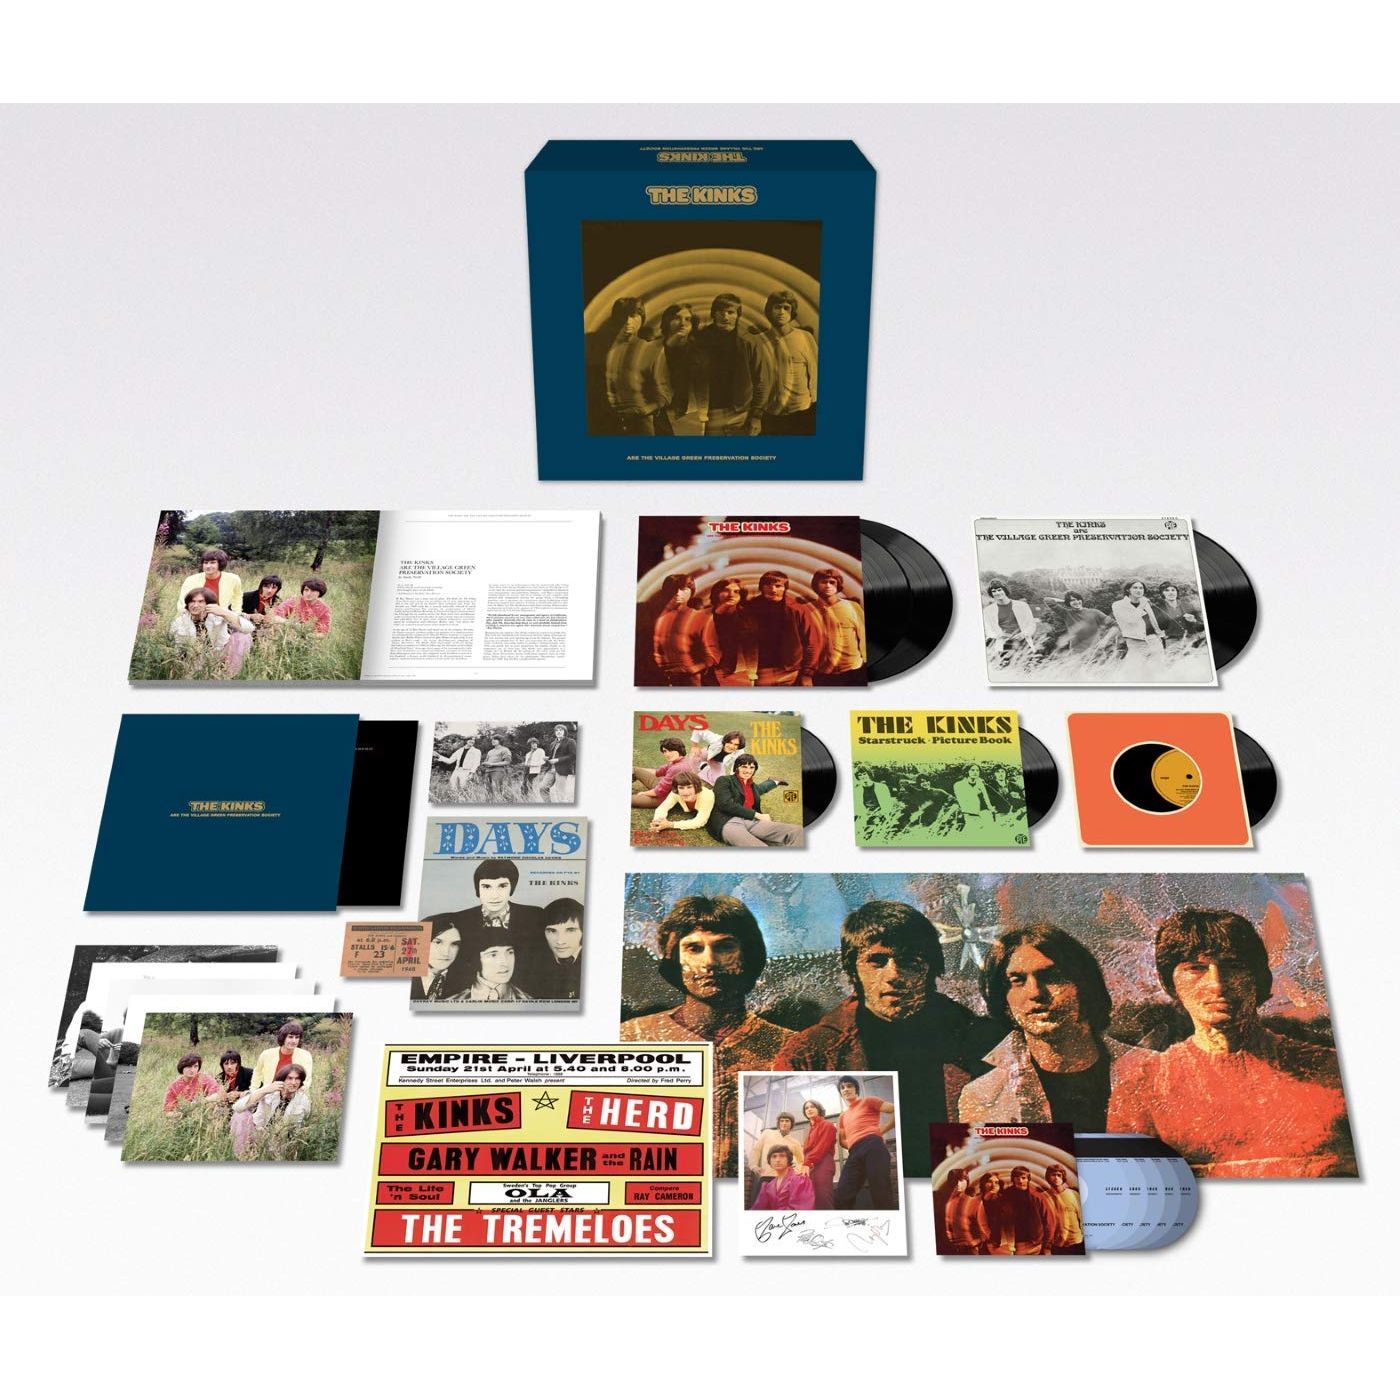 KINKS / キンクス / THE KINKS ARE THE VILLAGE GREEN PRESERVATION SOCIETY (50TH ANNIVERSARY REMASTERED EDITION 180G 3LP+5CD+3X7" BOX)